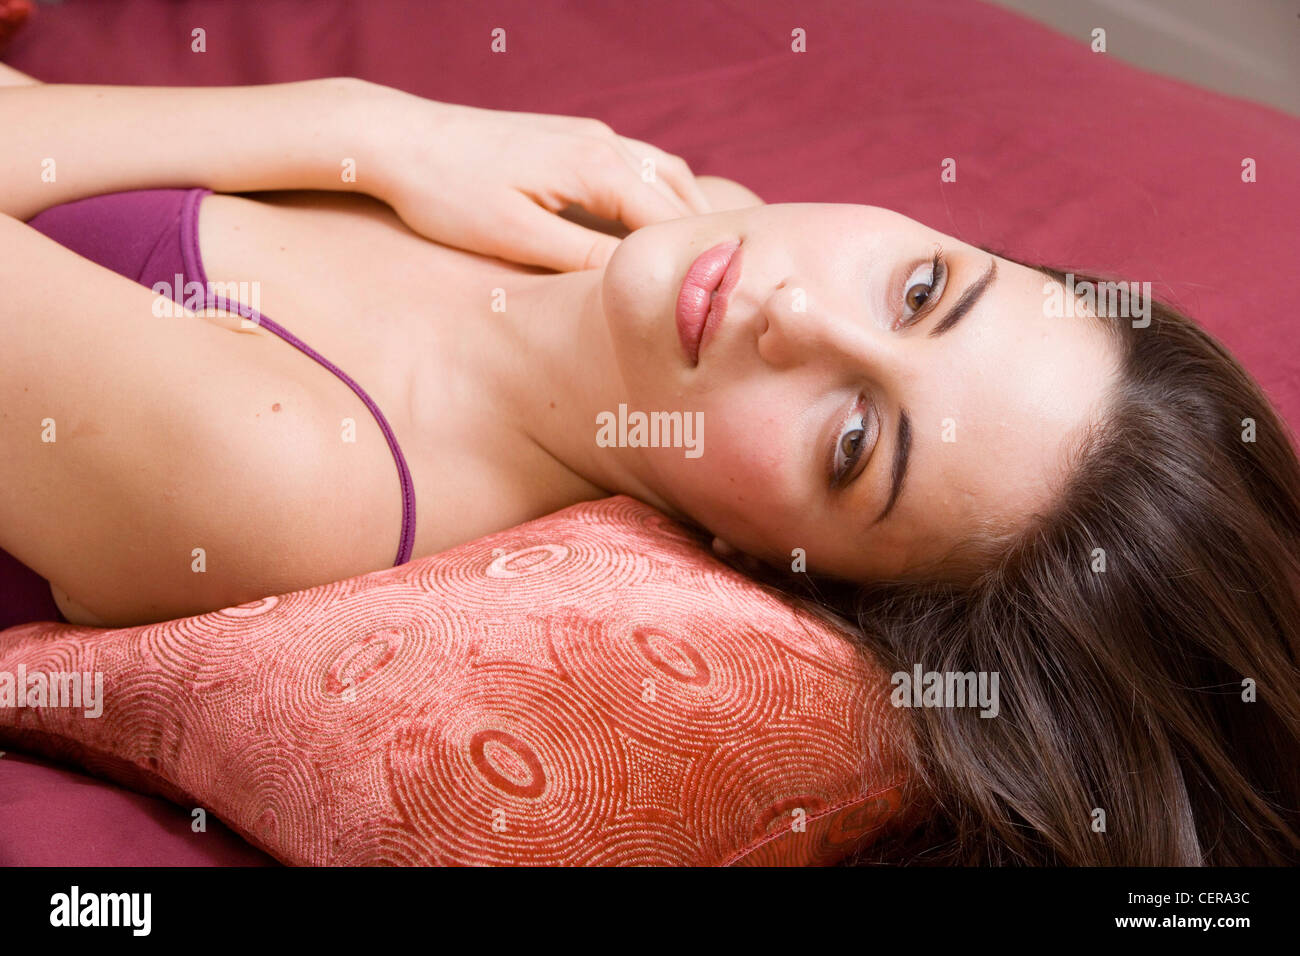 Winter Lifestyle Female long brunette hair laying on her back on a bed a red duvet, head propped on a red pillow, hair flowing Stock Photo